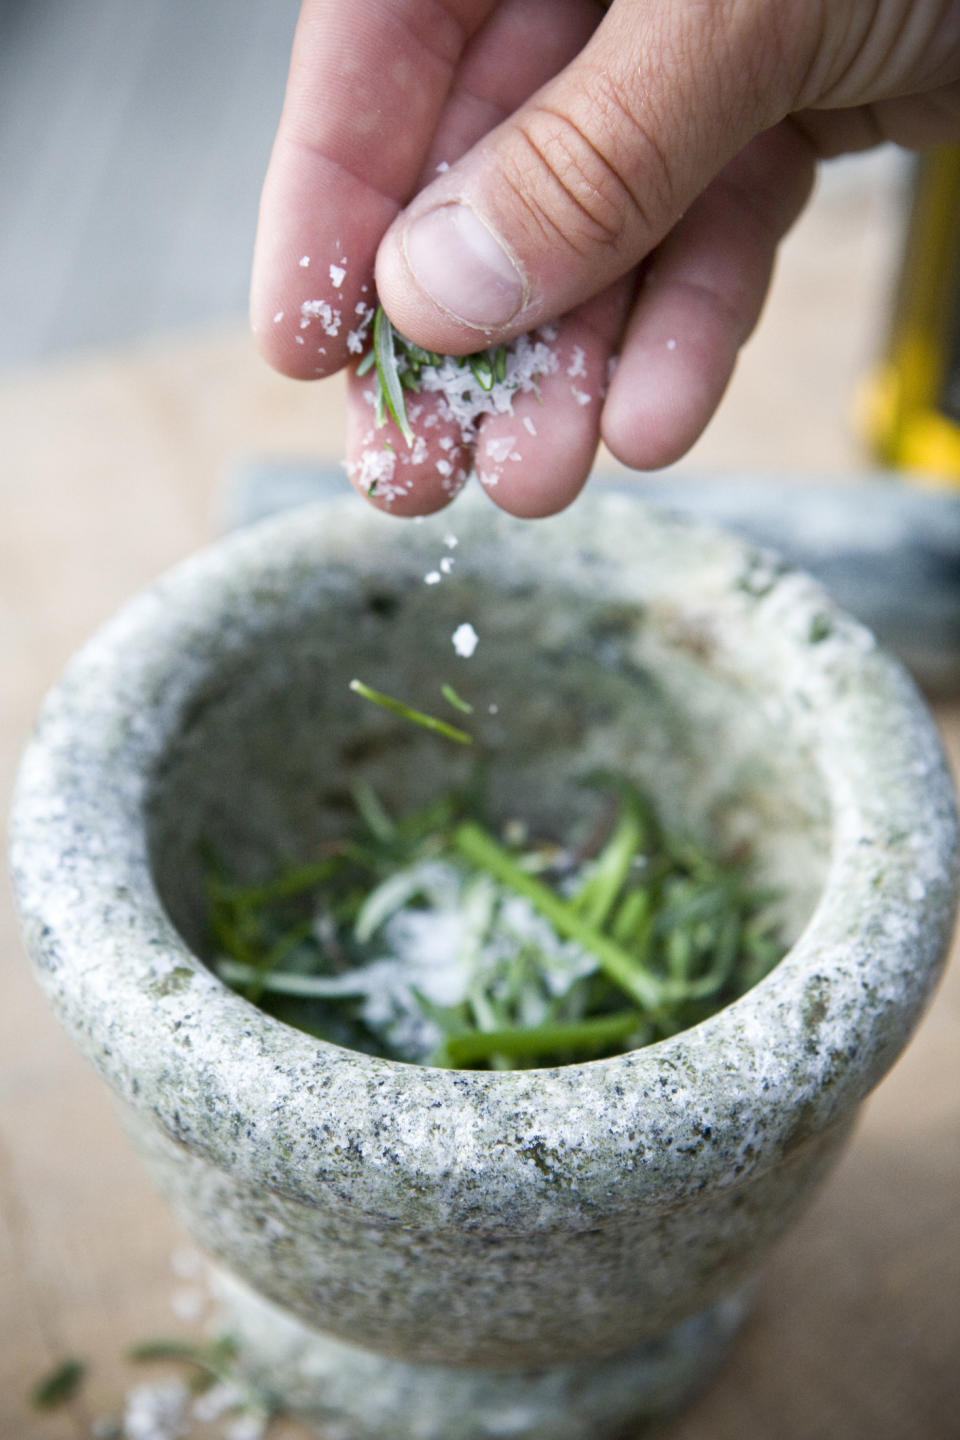 A hand putting salt on rosemary in a mortar